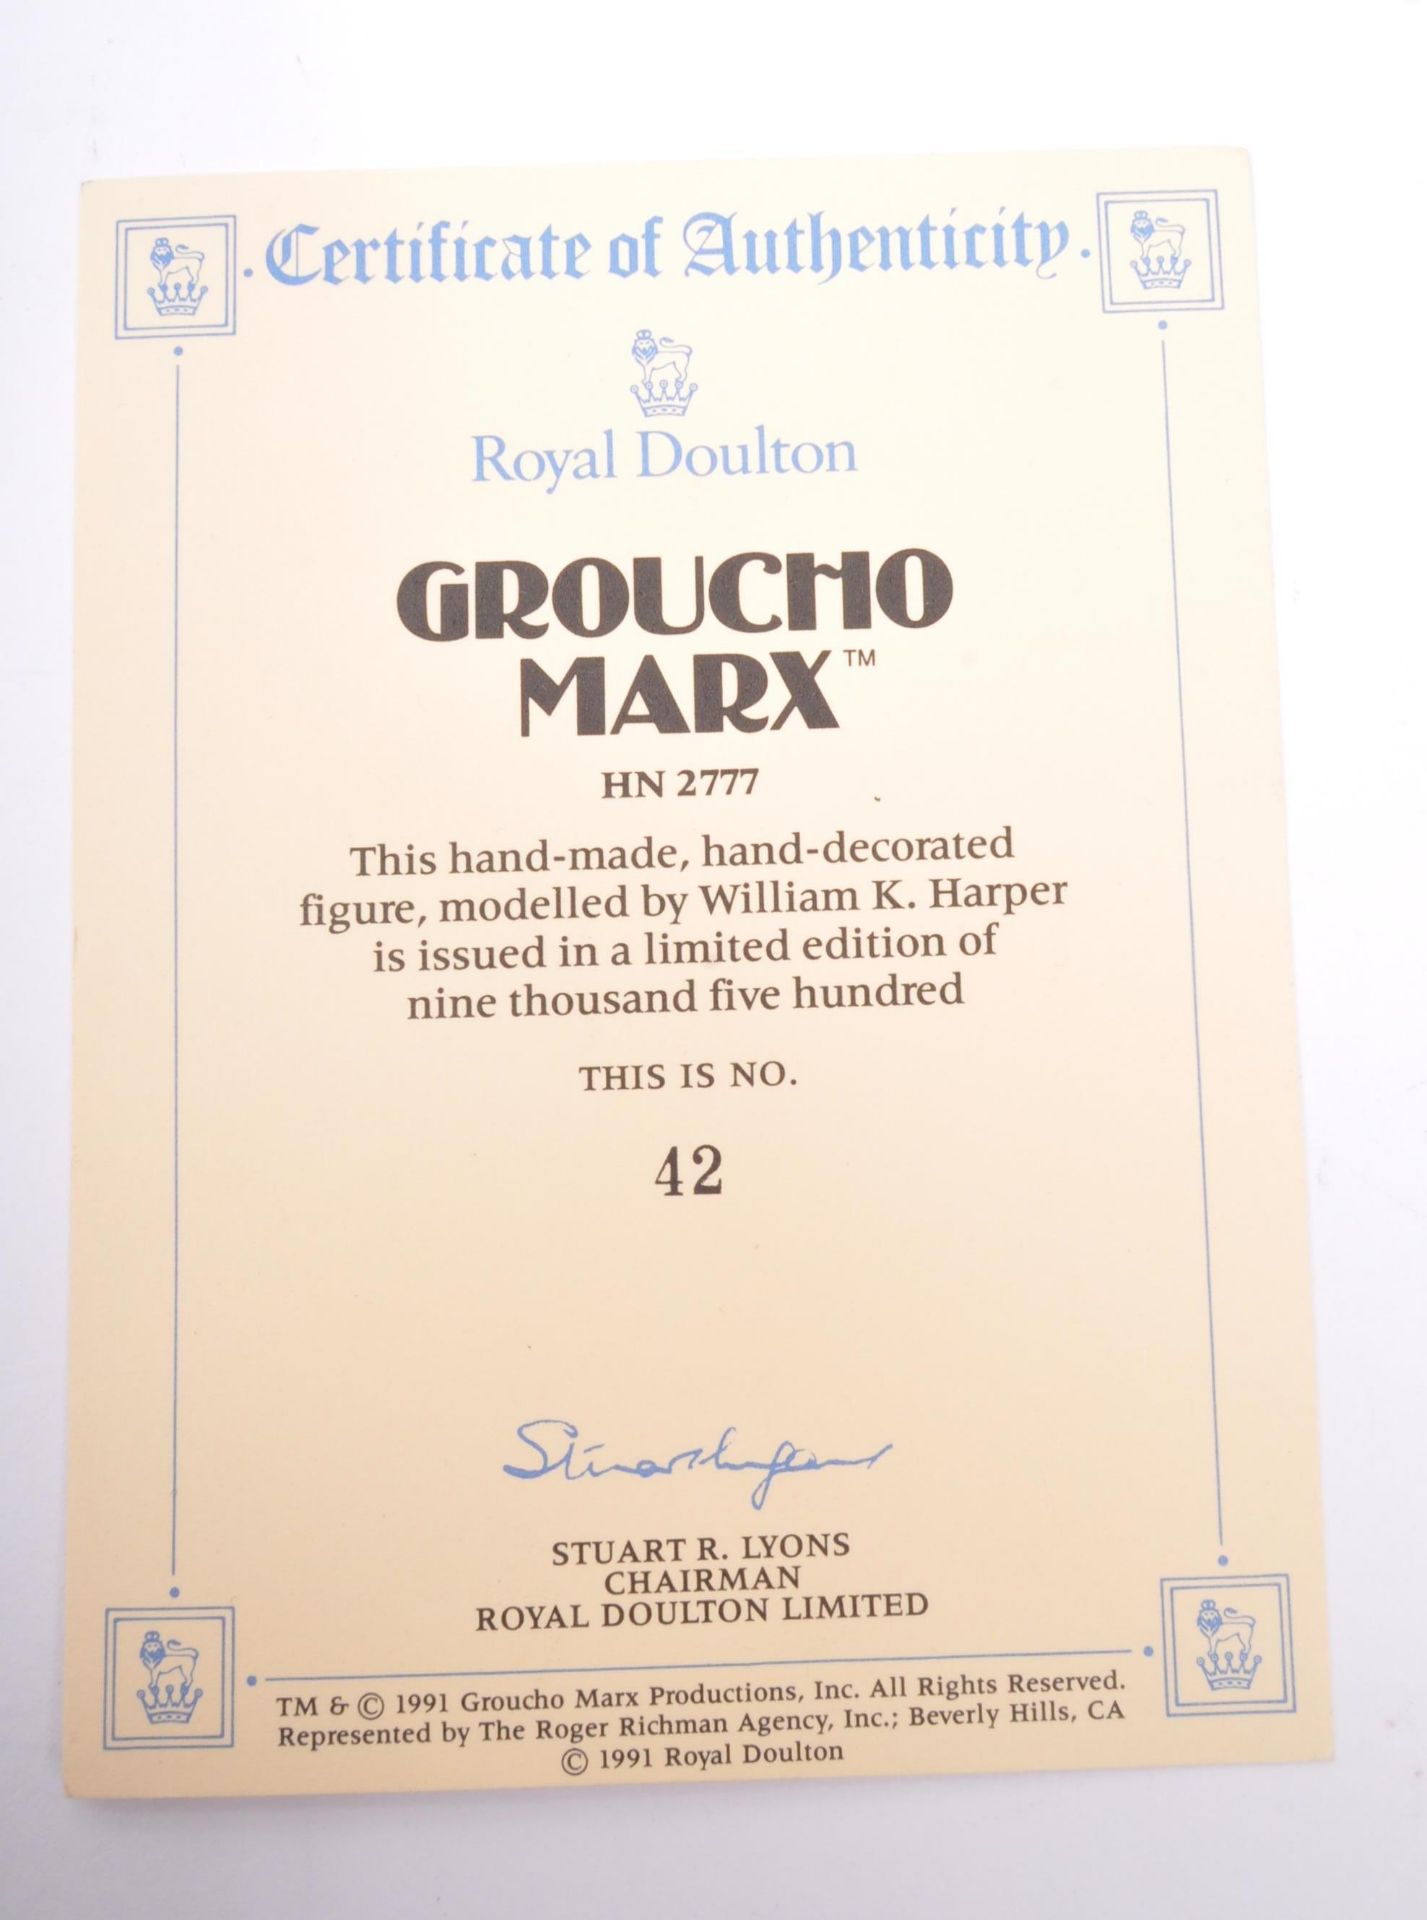 ROYAL DOULTON LIMITED EDITION GROUCHO MARX FIGURE - Image 5 of 6